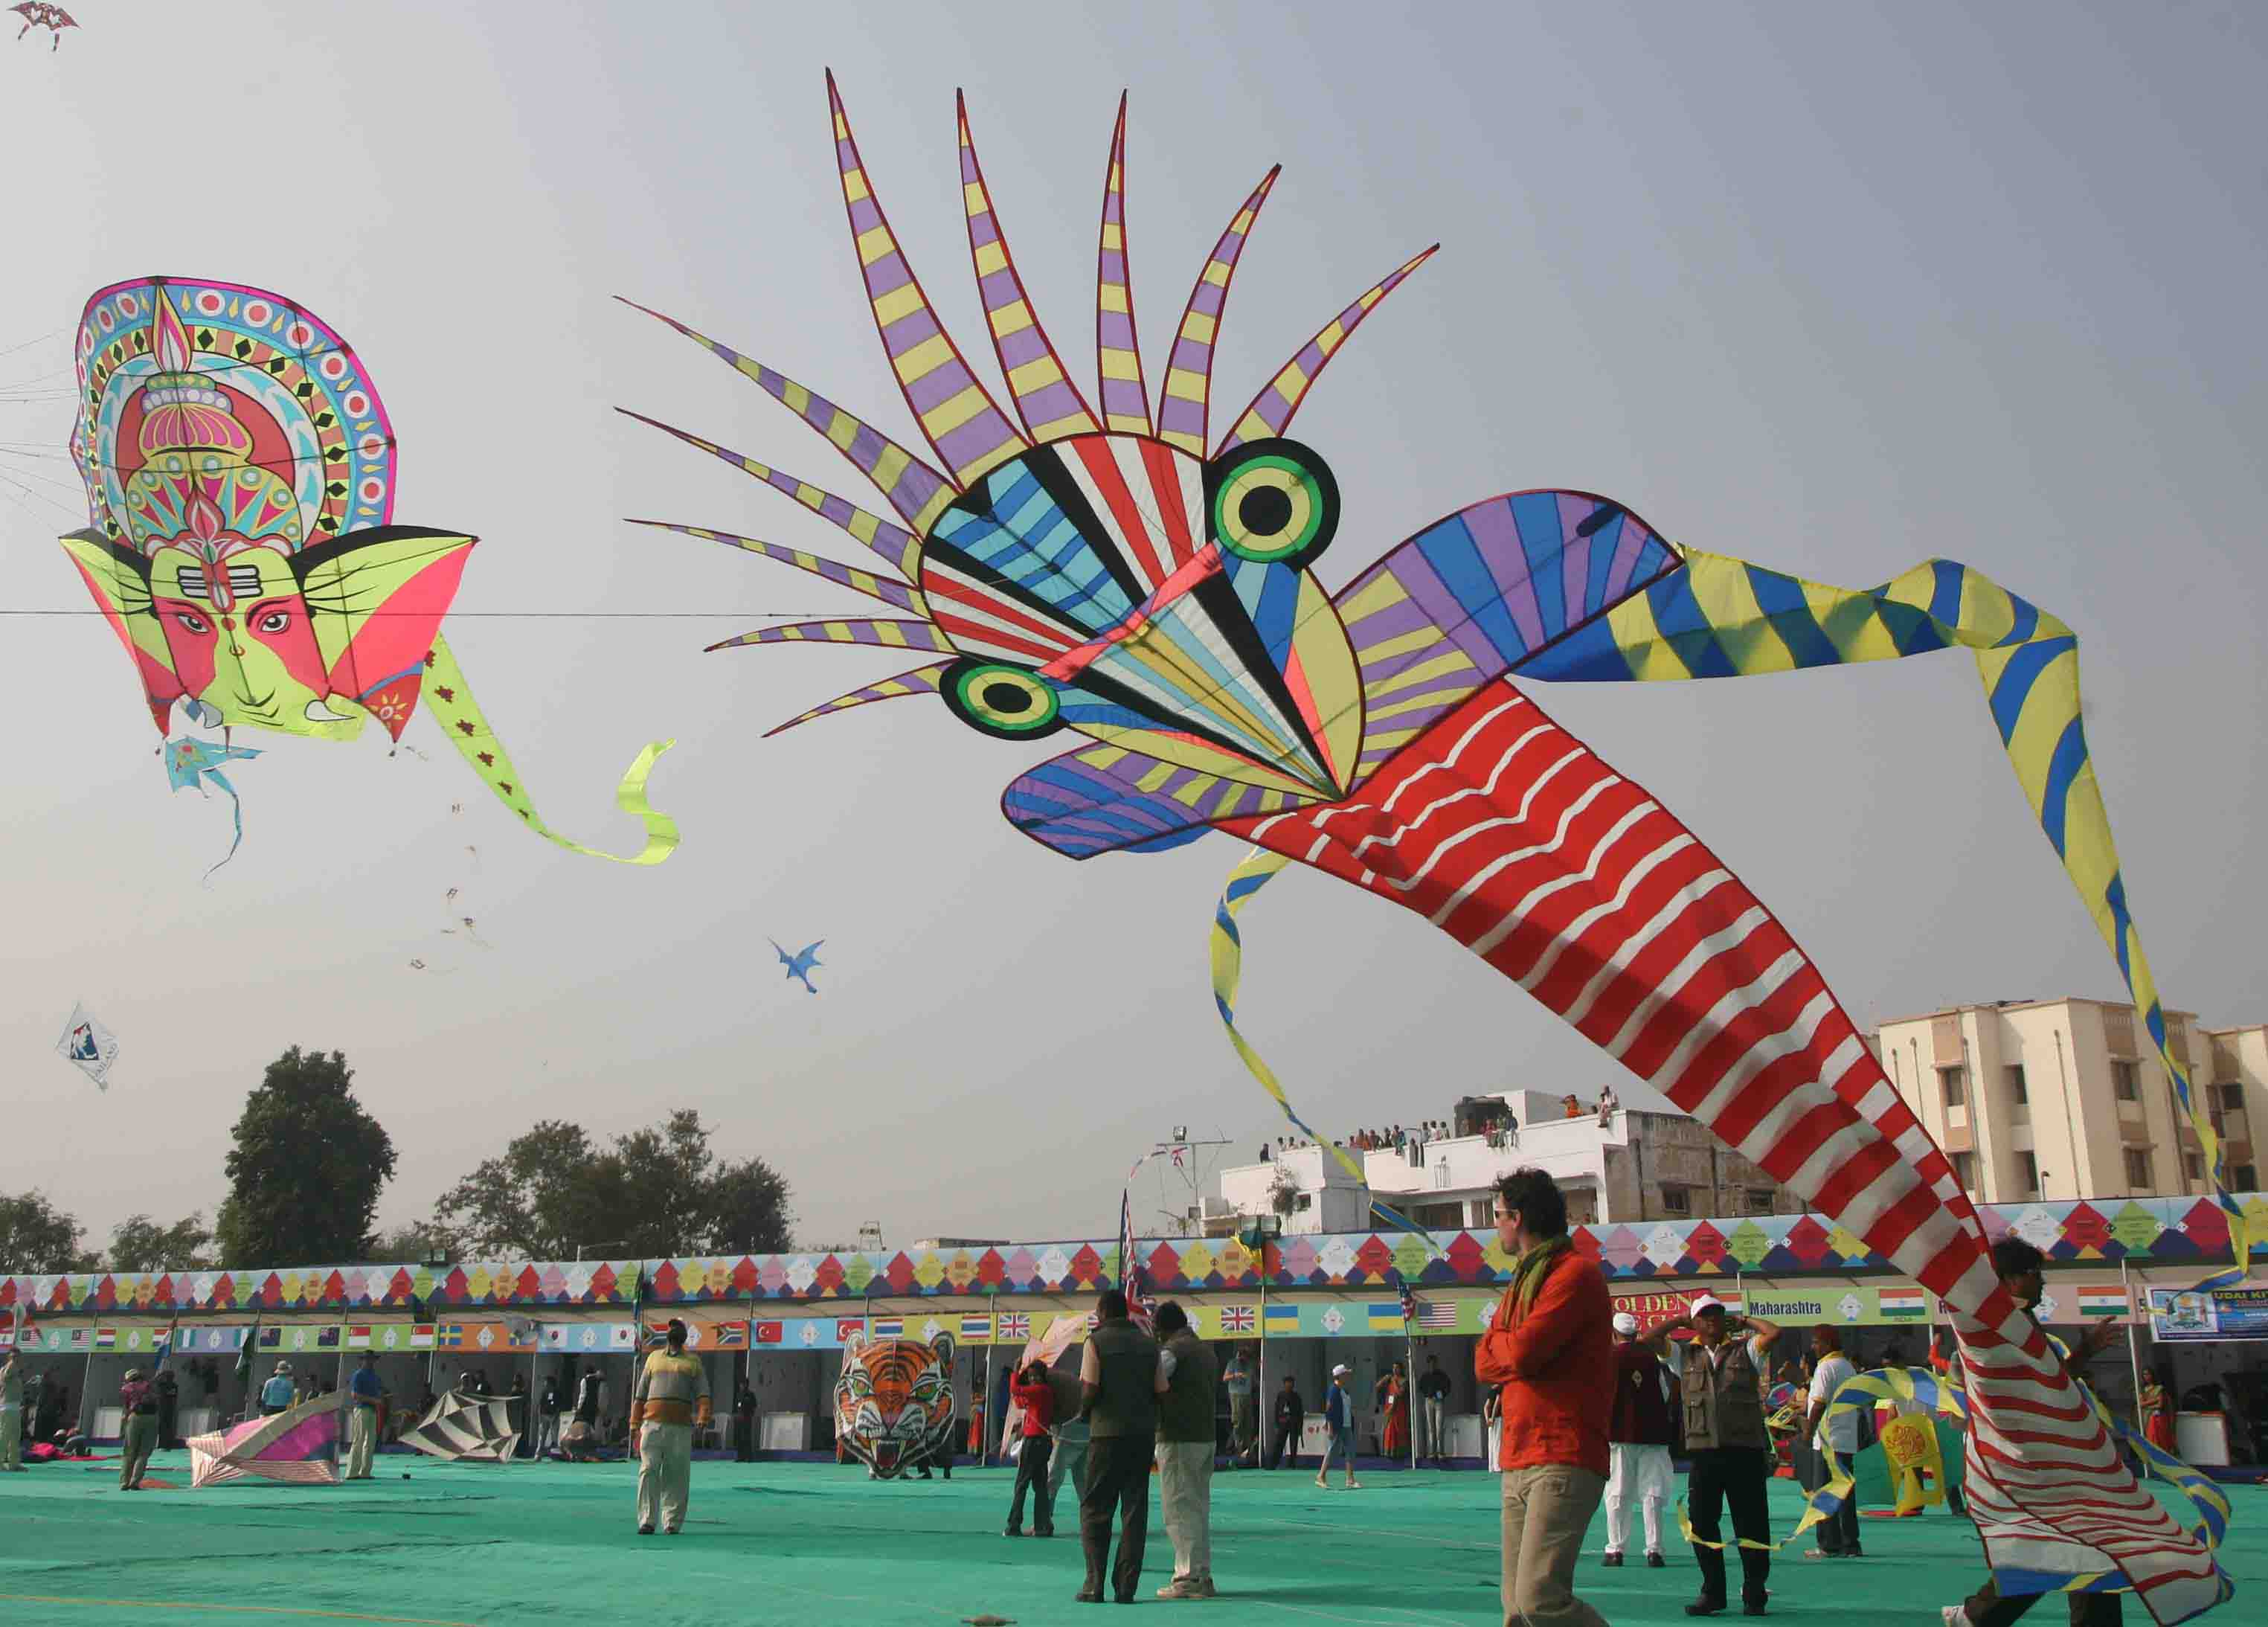 The-annual-International-Kite-Festival-attracts-kite-flyers-from-many-different-countries